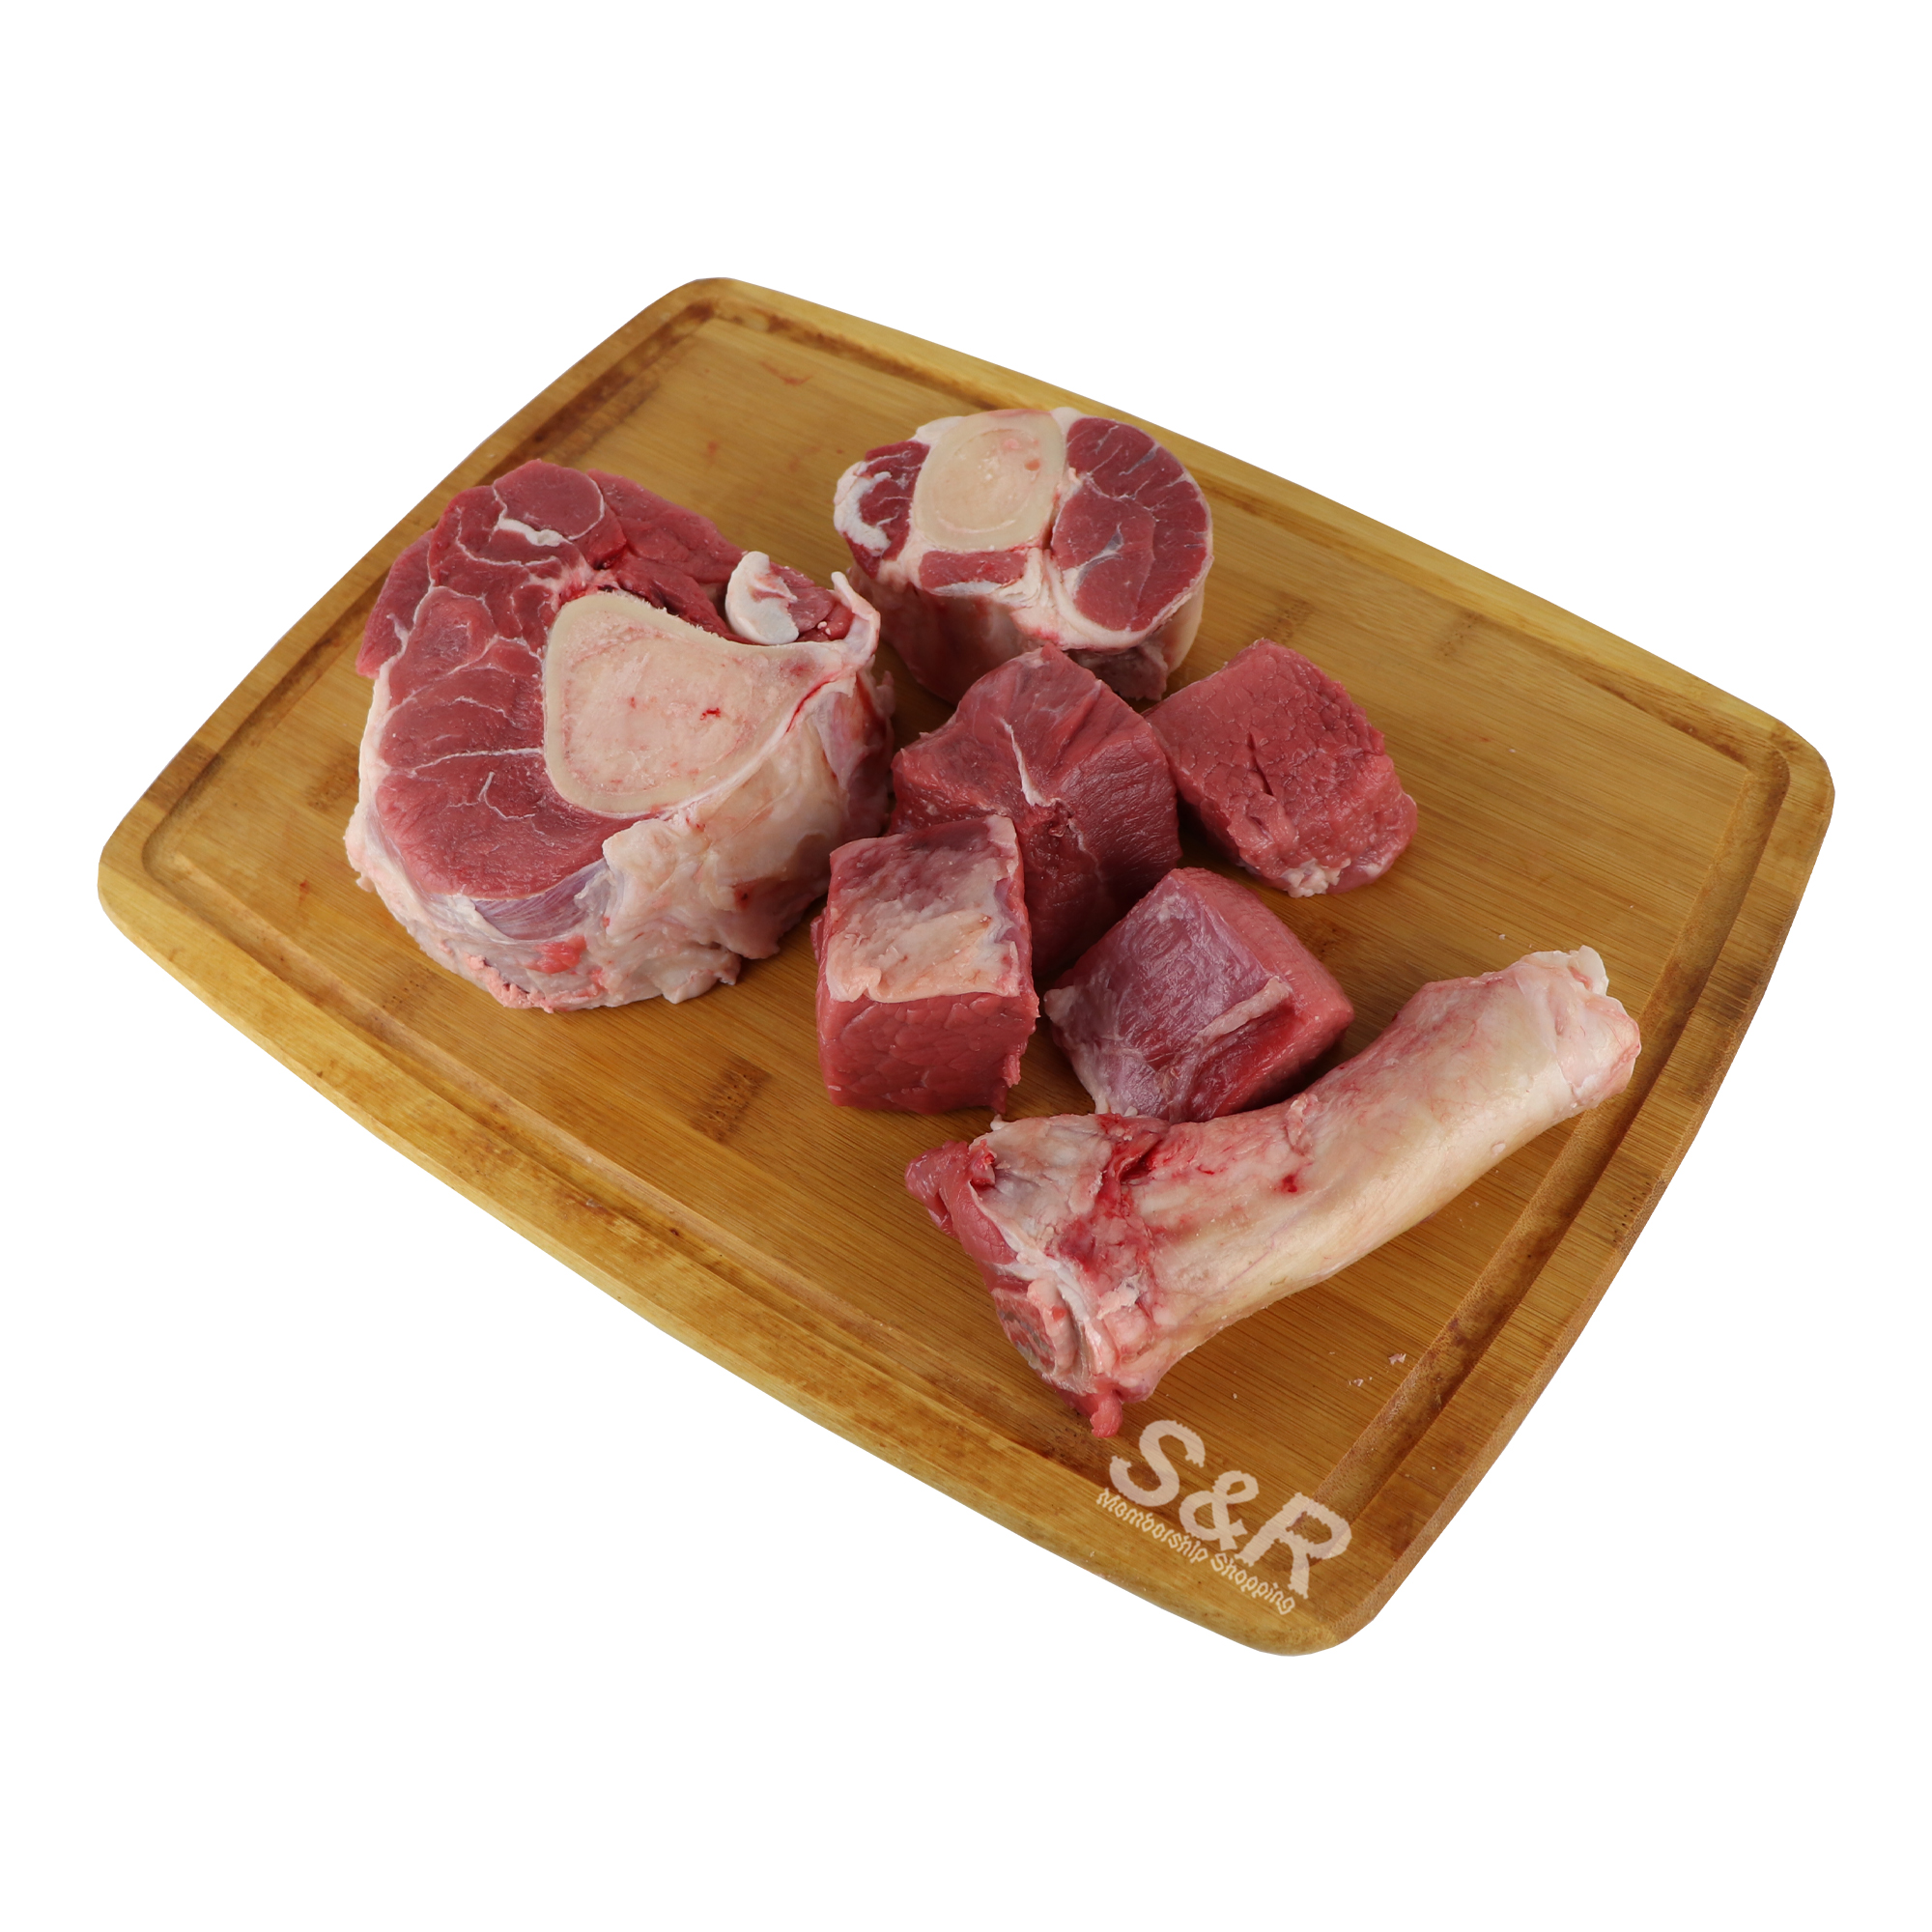 Members' Value Beef Bulalo approx. 2kg